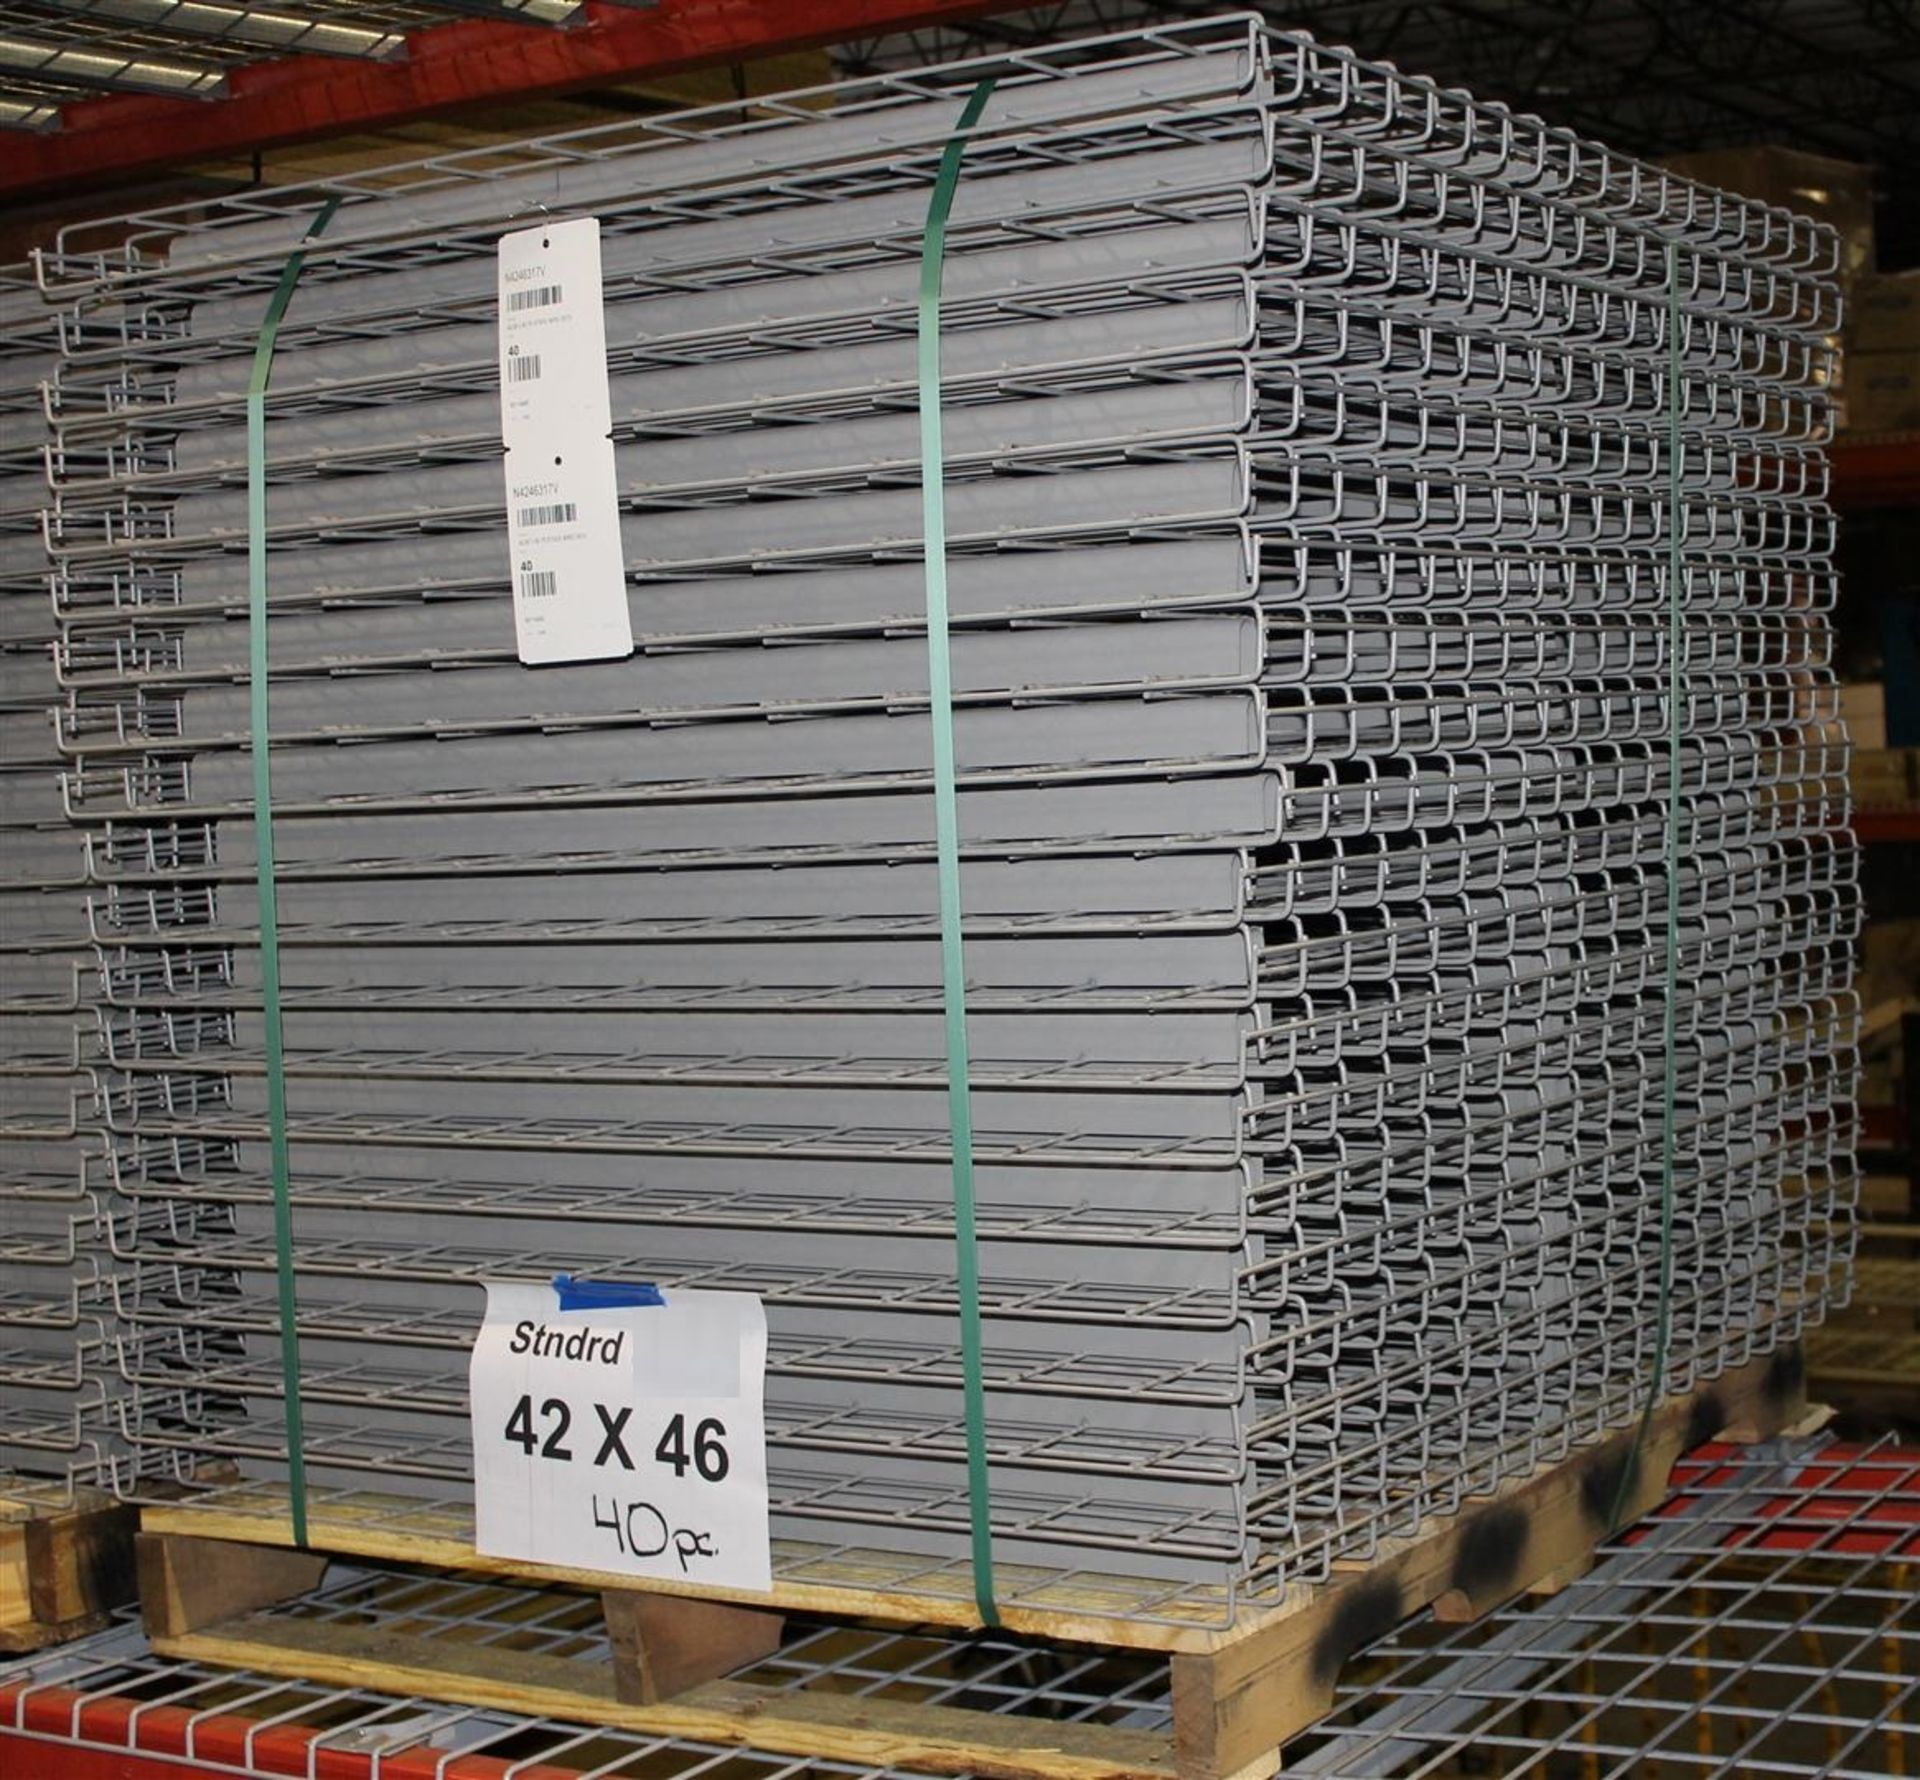 14 BAYS OF TEARDROP STYLE PALLET RACK, LIKE NEW, SIZE: 16'H x 42"D X 8'W - Image 3 of 3